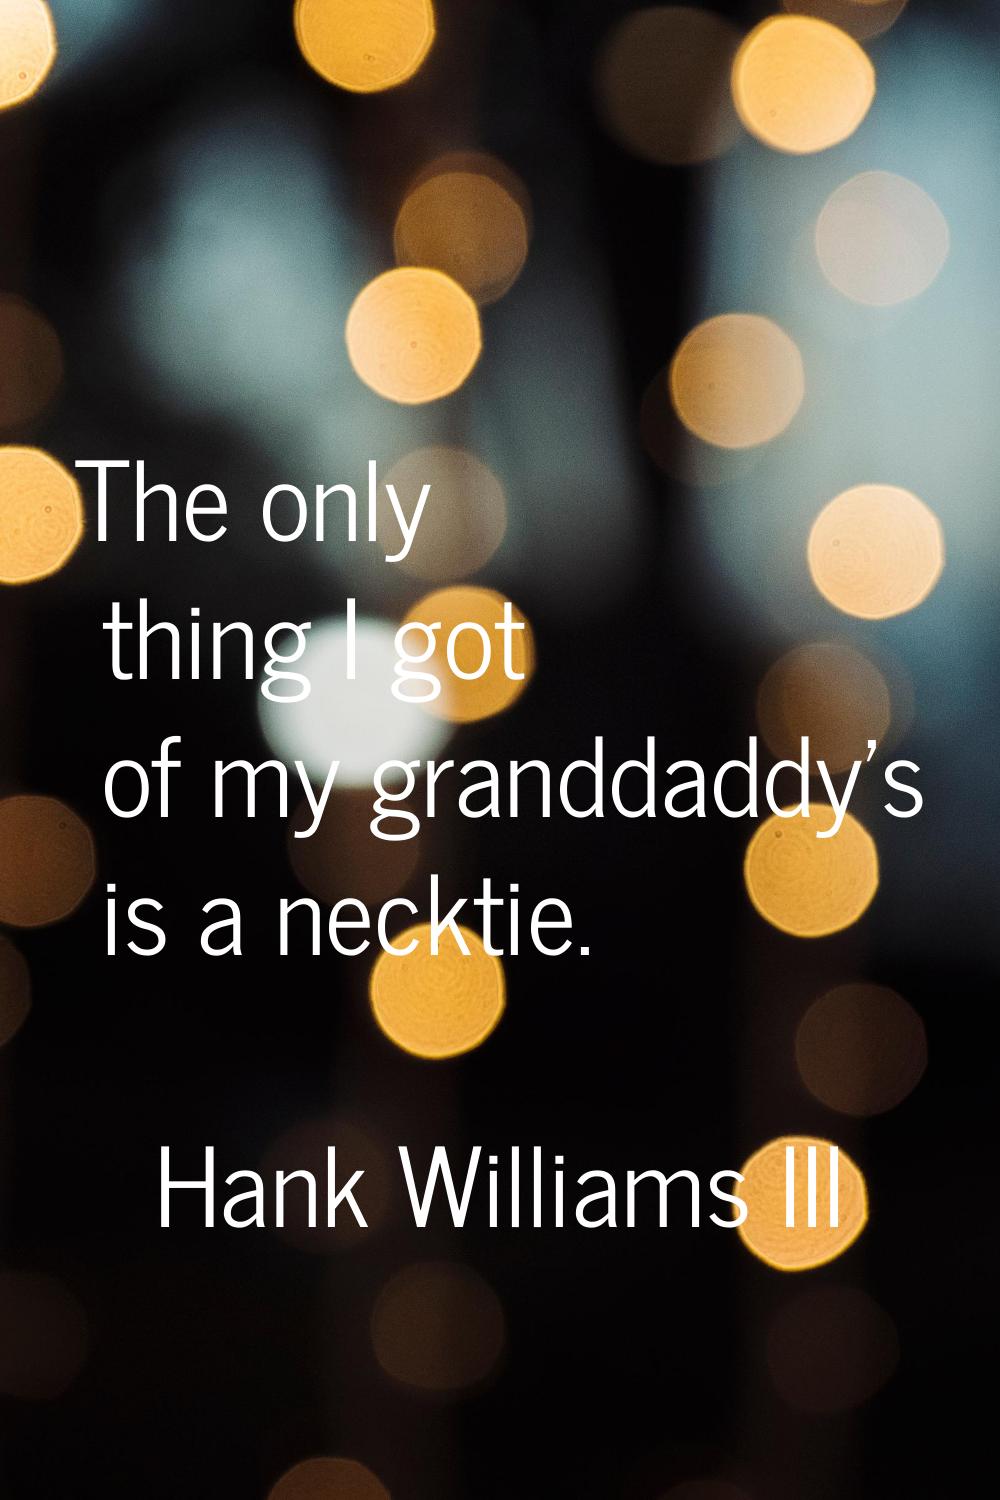 The only thing I got of my granddaddy's is a necktie.